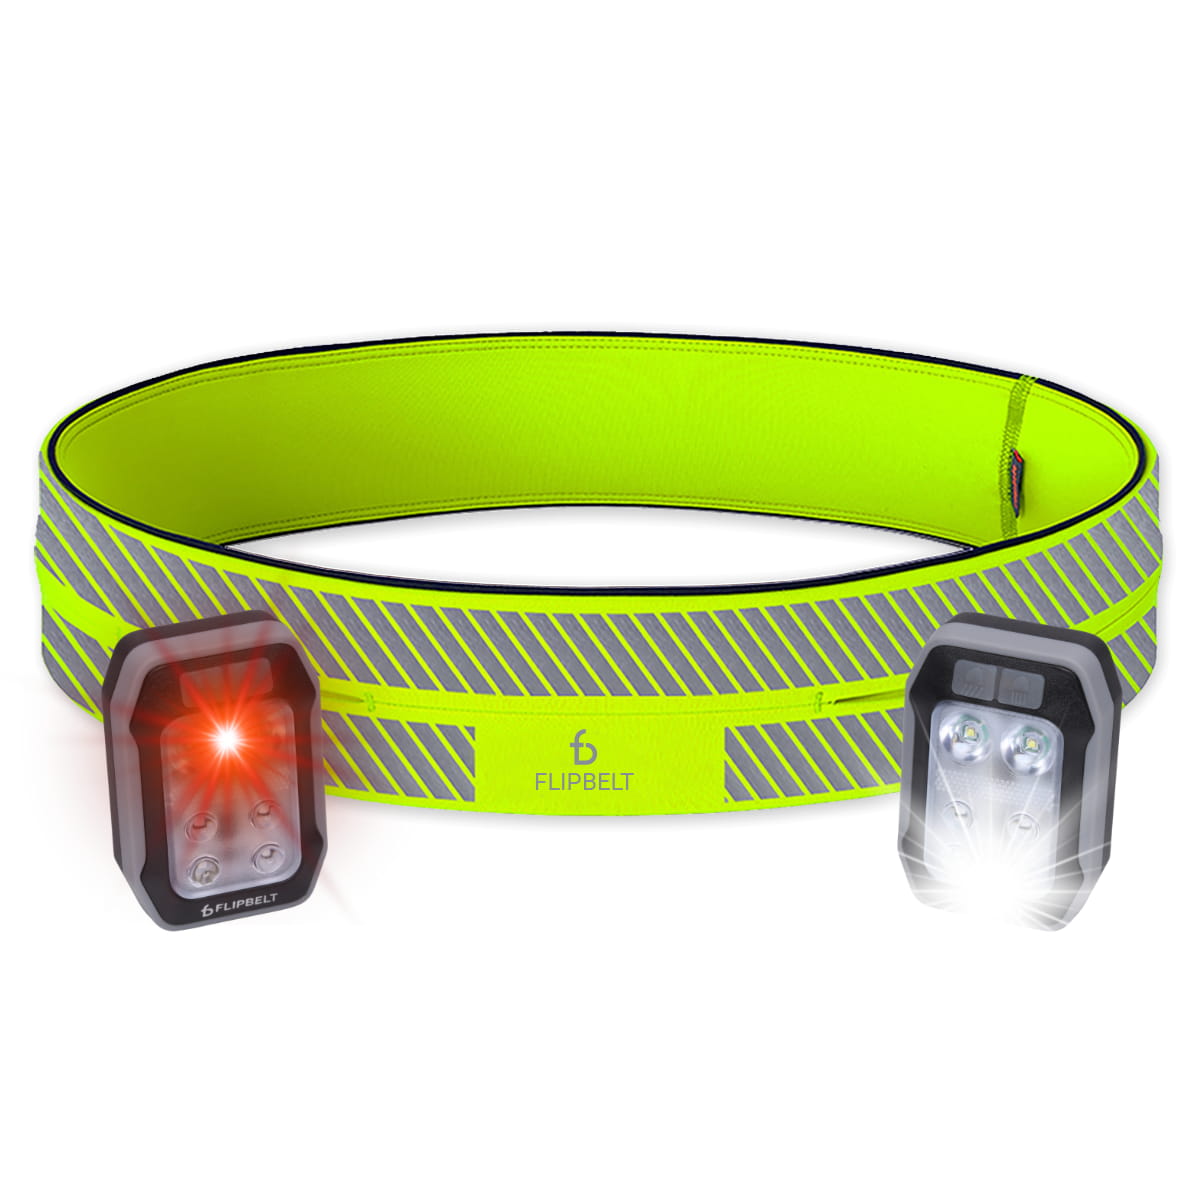 MECCANIXITY Reflective Belt Bands 24x1.6 Inch Strip High Visibility  Reflective Running Gear for Cycling Running Walking Green, Reflective Gear  -  Canada